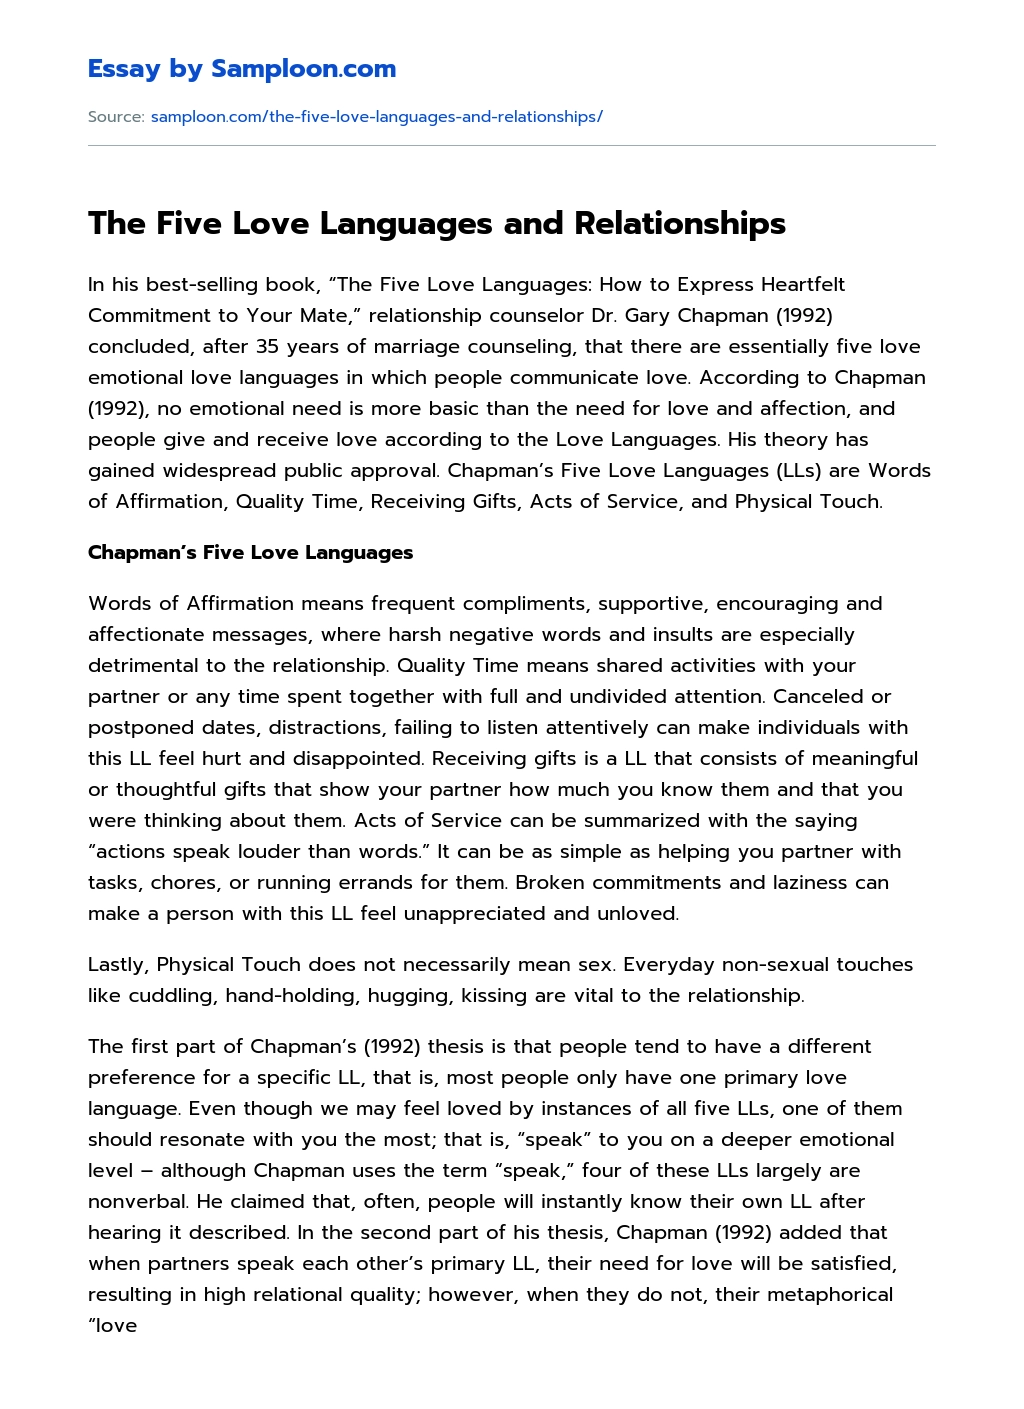 The Five Love Languages and Relationships essay